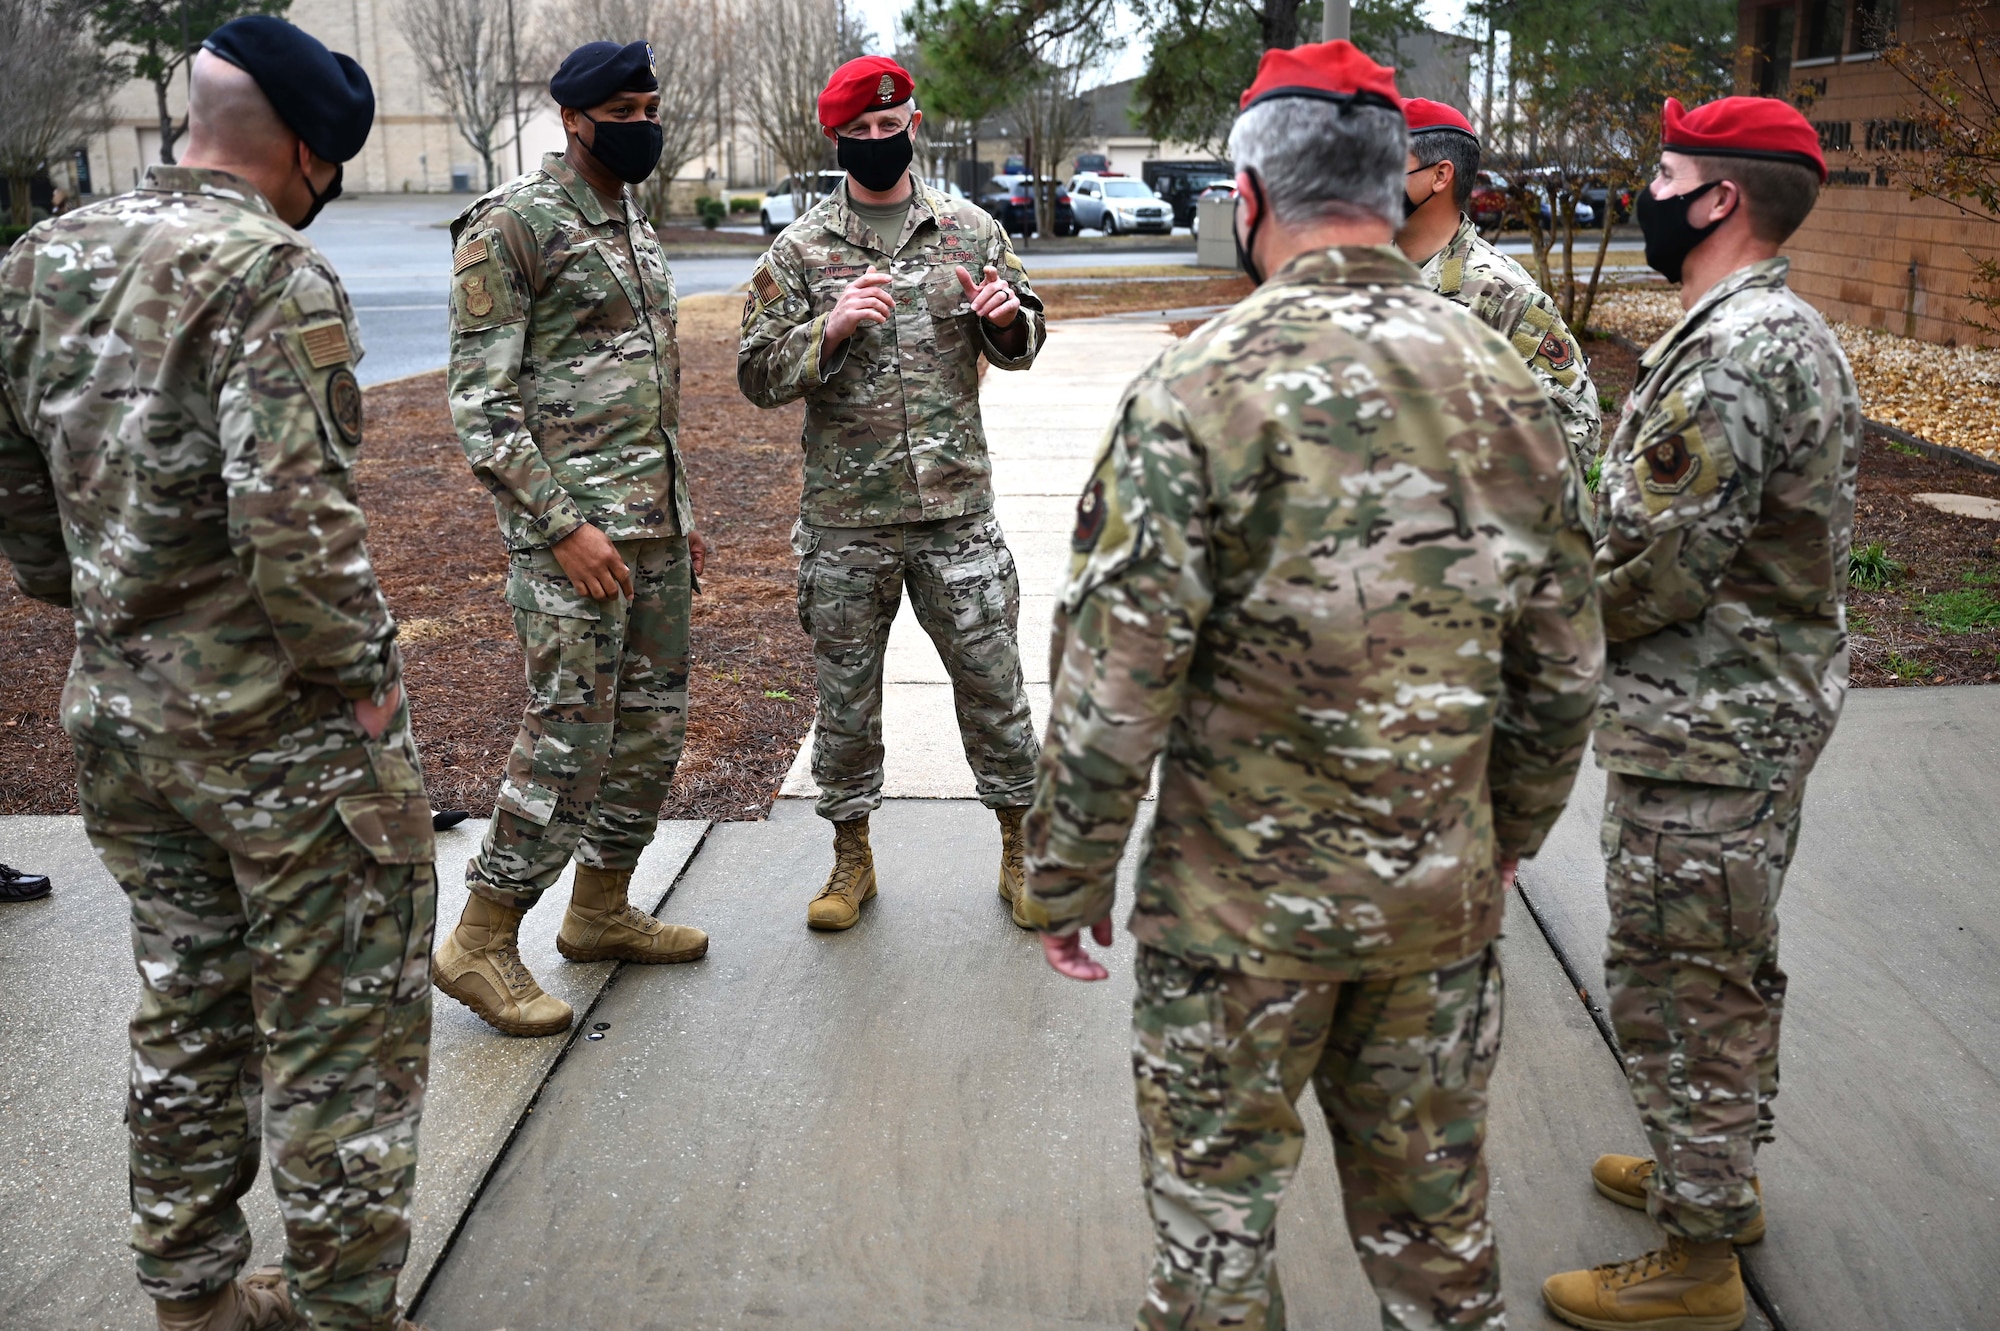 Brigadier General Roy Collins, left, director of Security Forces, deputy chief of staff for Logistics, Engineering and Force Protection, is introduced to members of the 23rd Special Tactics Squadron leadership team during a visit to Hurlburt Field, Fla., Jan. 11, 2021. During the tour, Collins and Chief Master Sgt. Brian Lewis, Security Forces career field manager, were briefed on the Deployed Aircraft Ground Response Element (DAGRE) training process, took part in a lasershot demonstration, and visited the 23rd STS compound for a mission briefing and a walk around the unit’s multilevel training and fitness facilities. (U.S. Air Force photo by Senior Airman Brandon Esau)